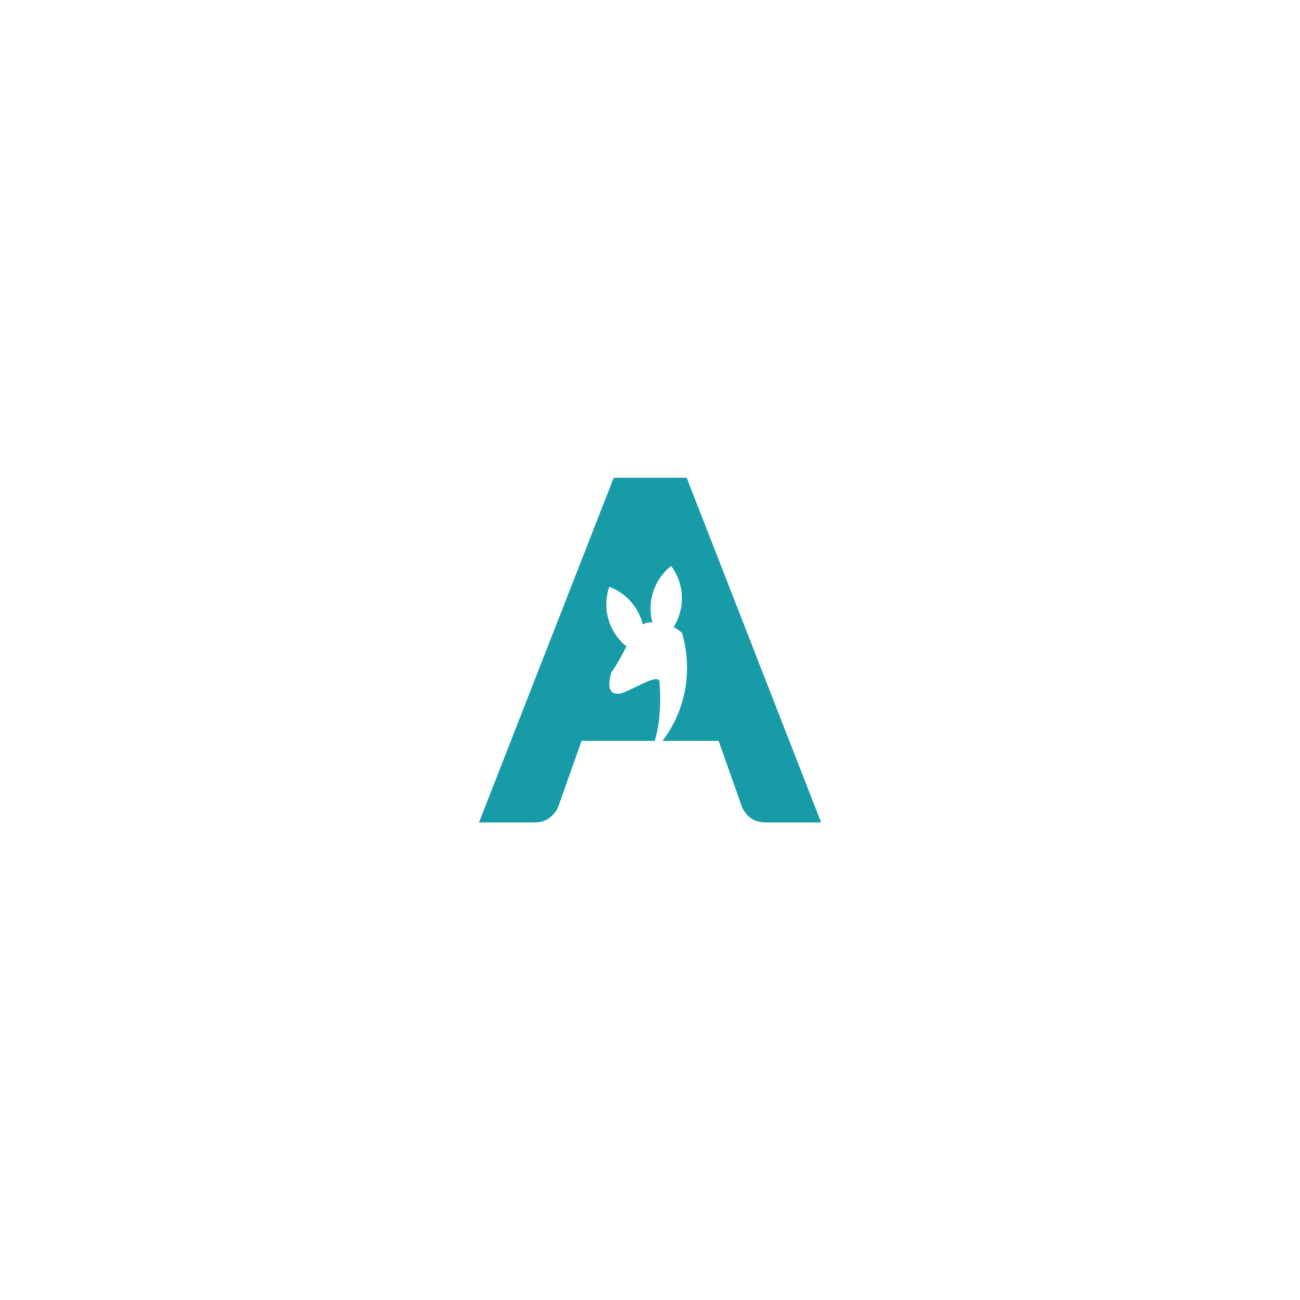 Letter A in teal with kangaroo head in the middle